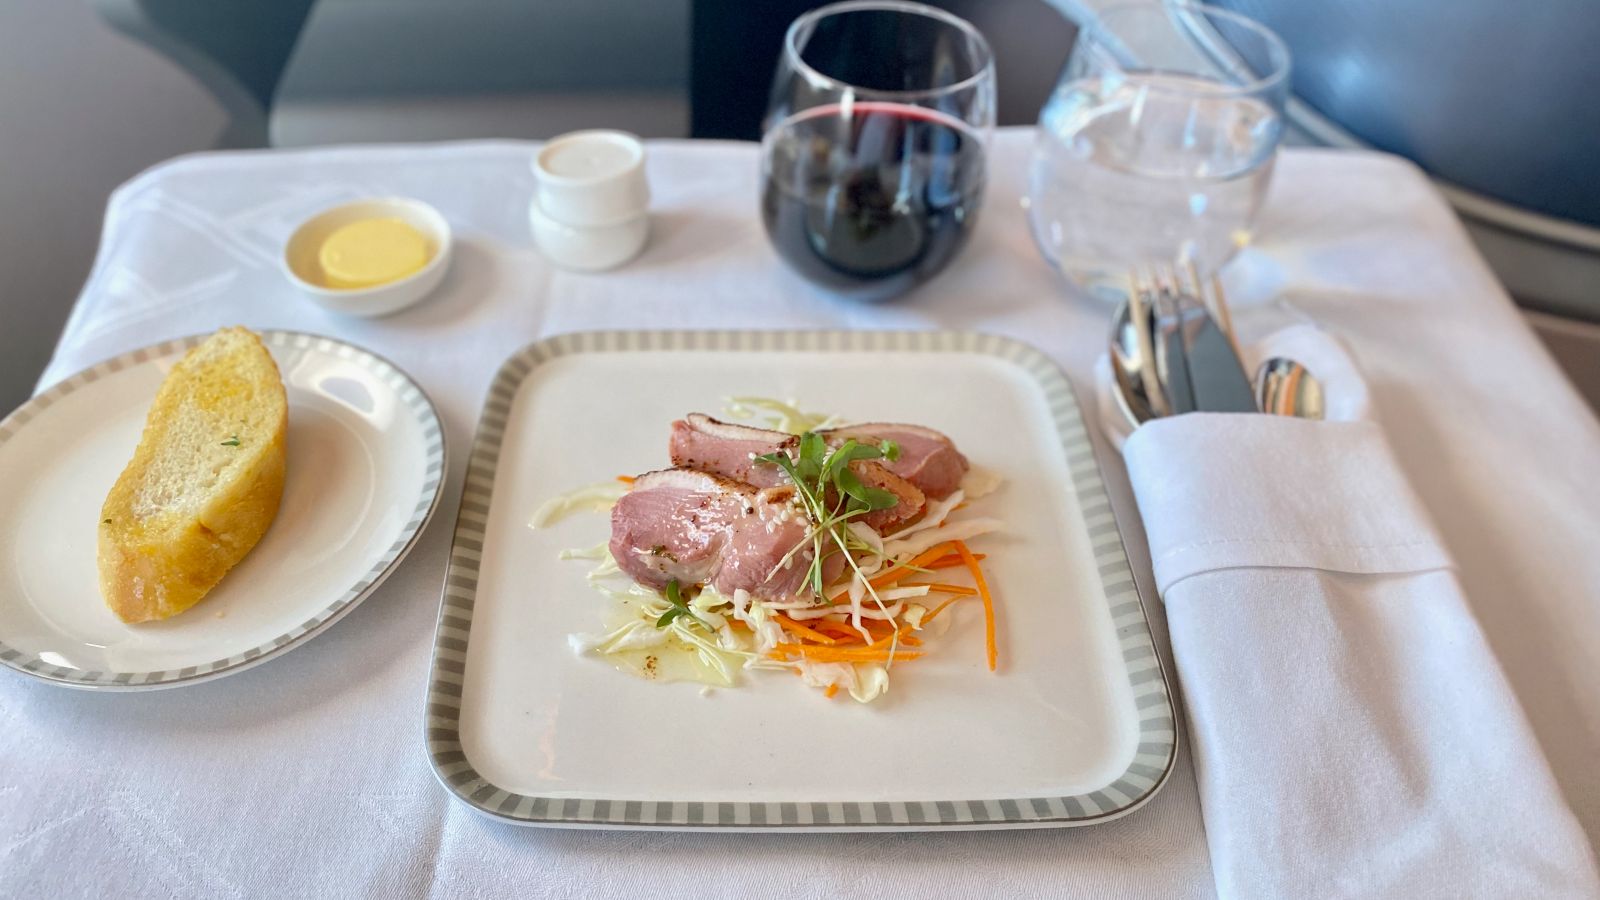 Singapore Airlines Business Class smoked duck